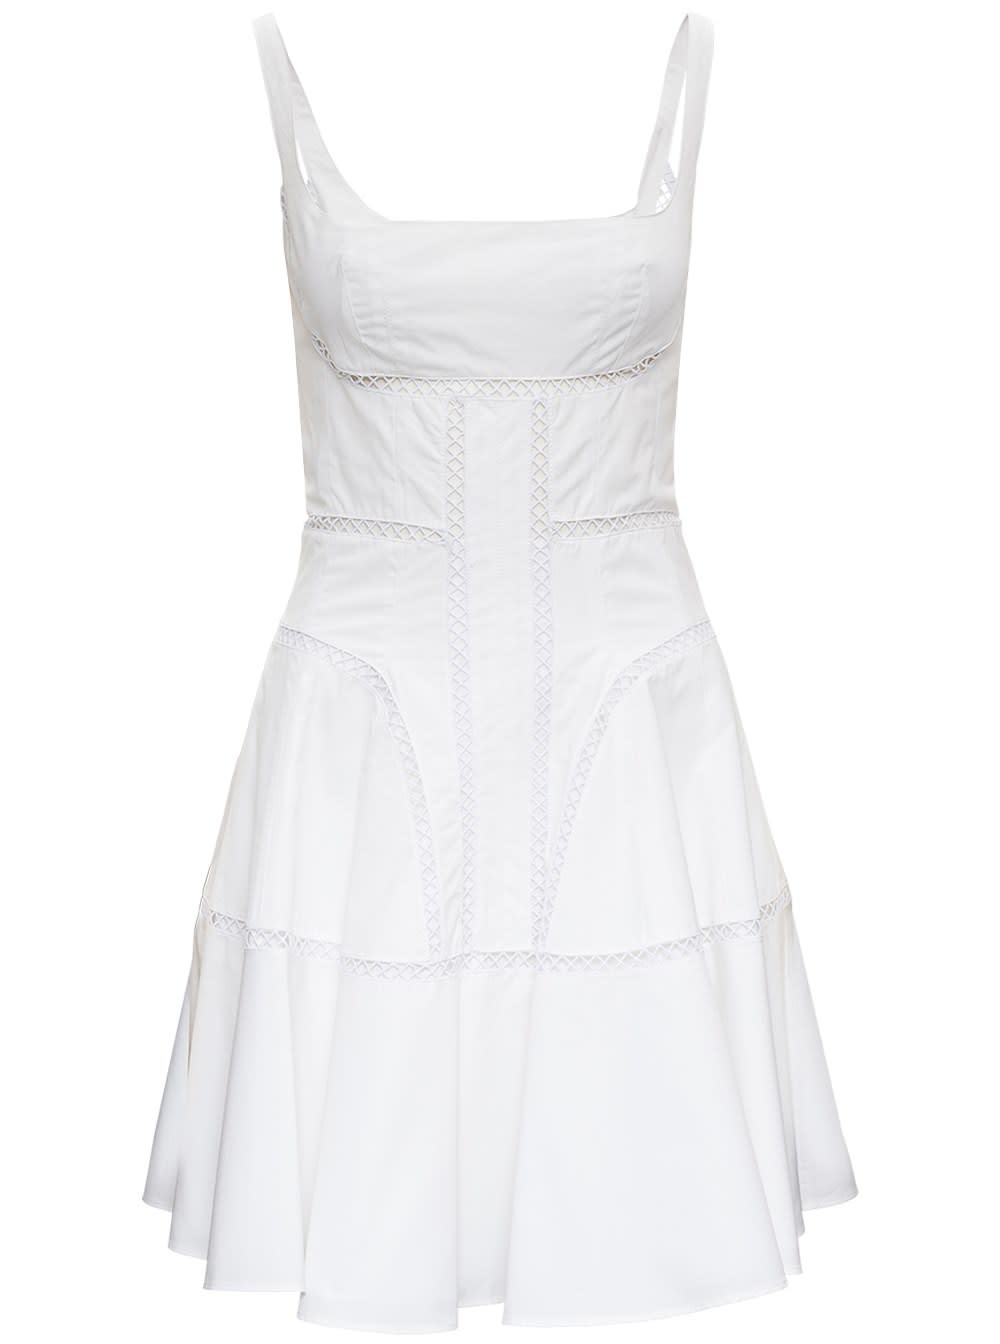 Giovanni Bedin White Cotton Dress With Perforated Inserts